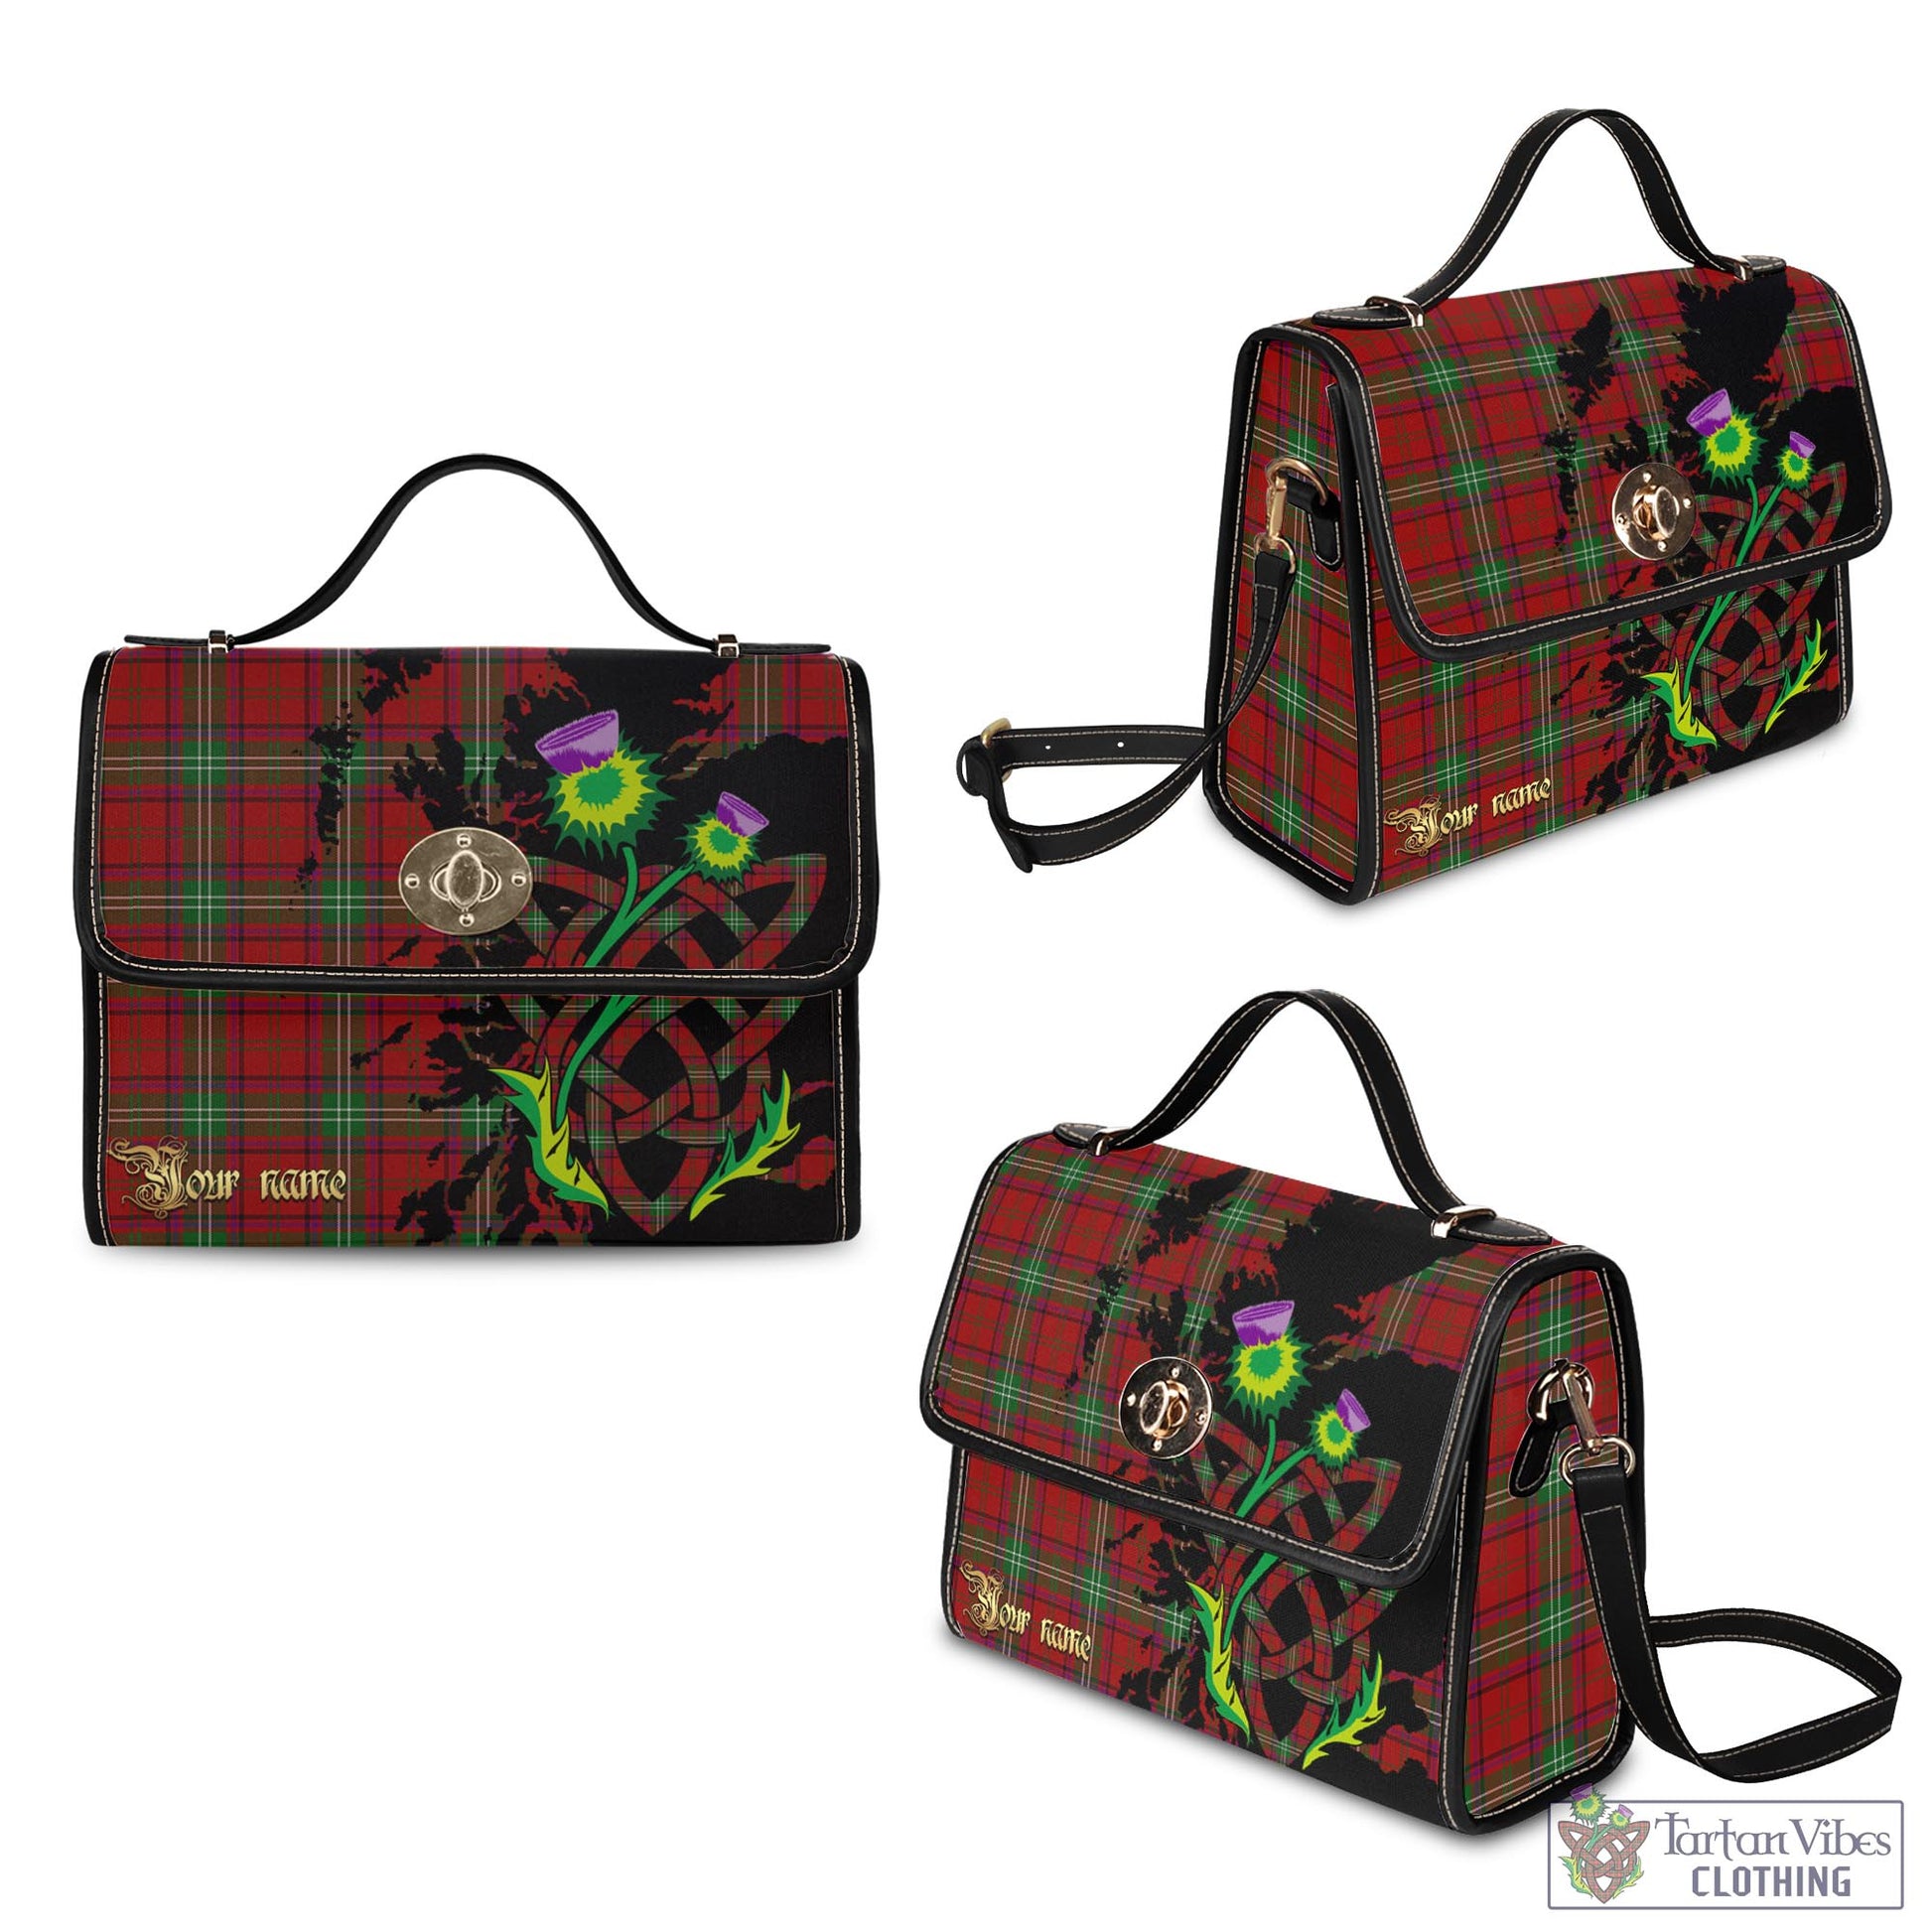 Tartan Vibes Clothing Seton Tartan Waterproof Canvas Bag with Scotland Map and Thistle Celtic Accents